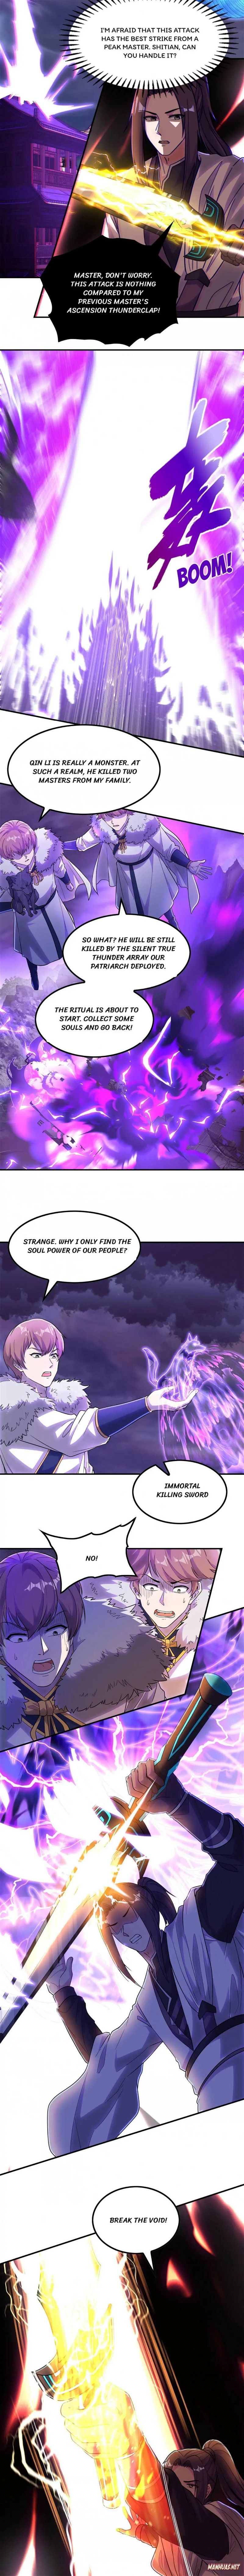 Son-In-Law Above Them All Chapter 206 page 3 - MangaWeebs.in